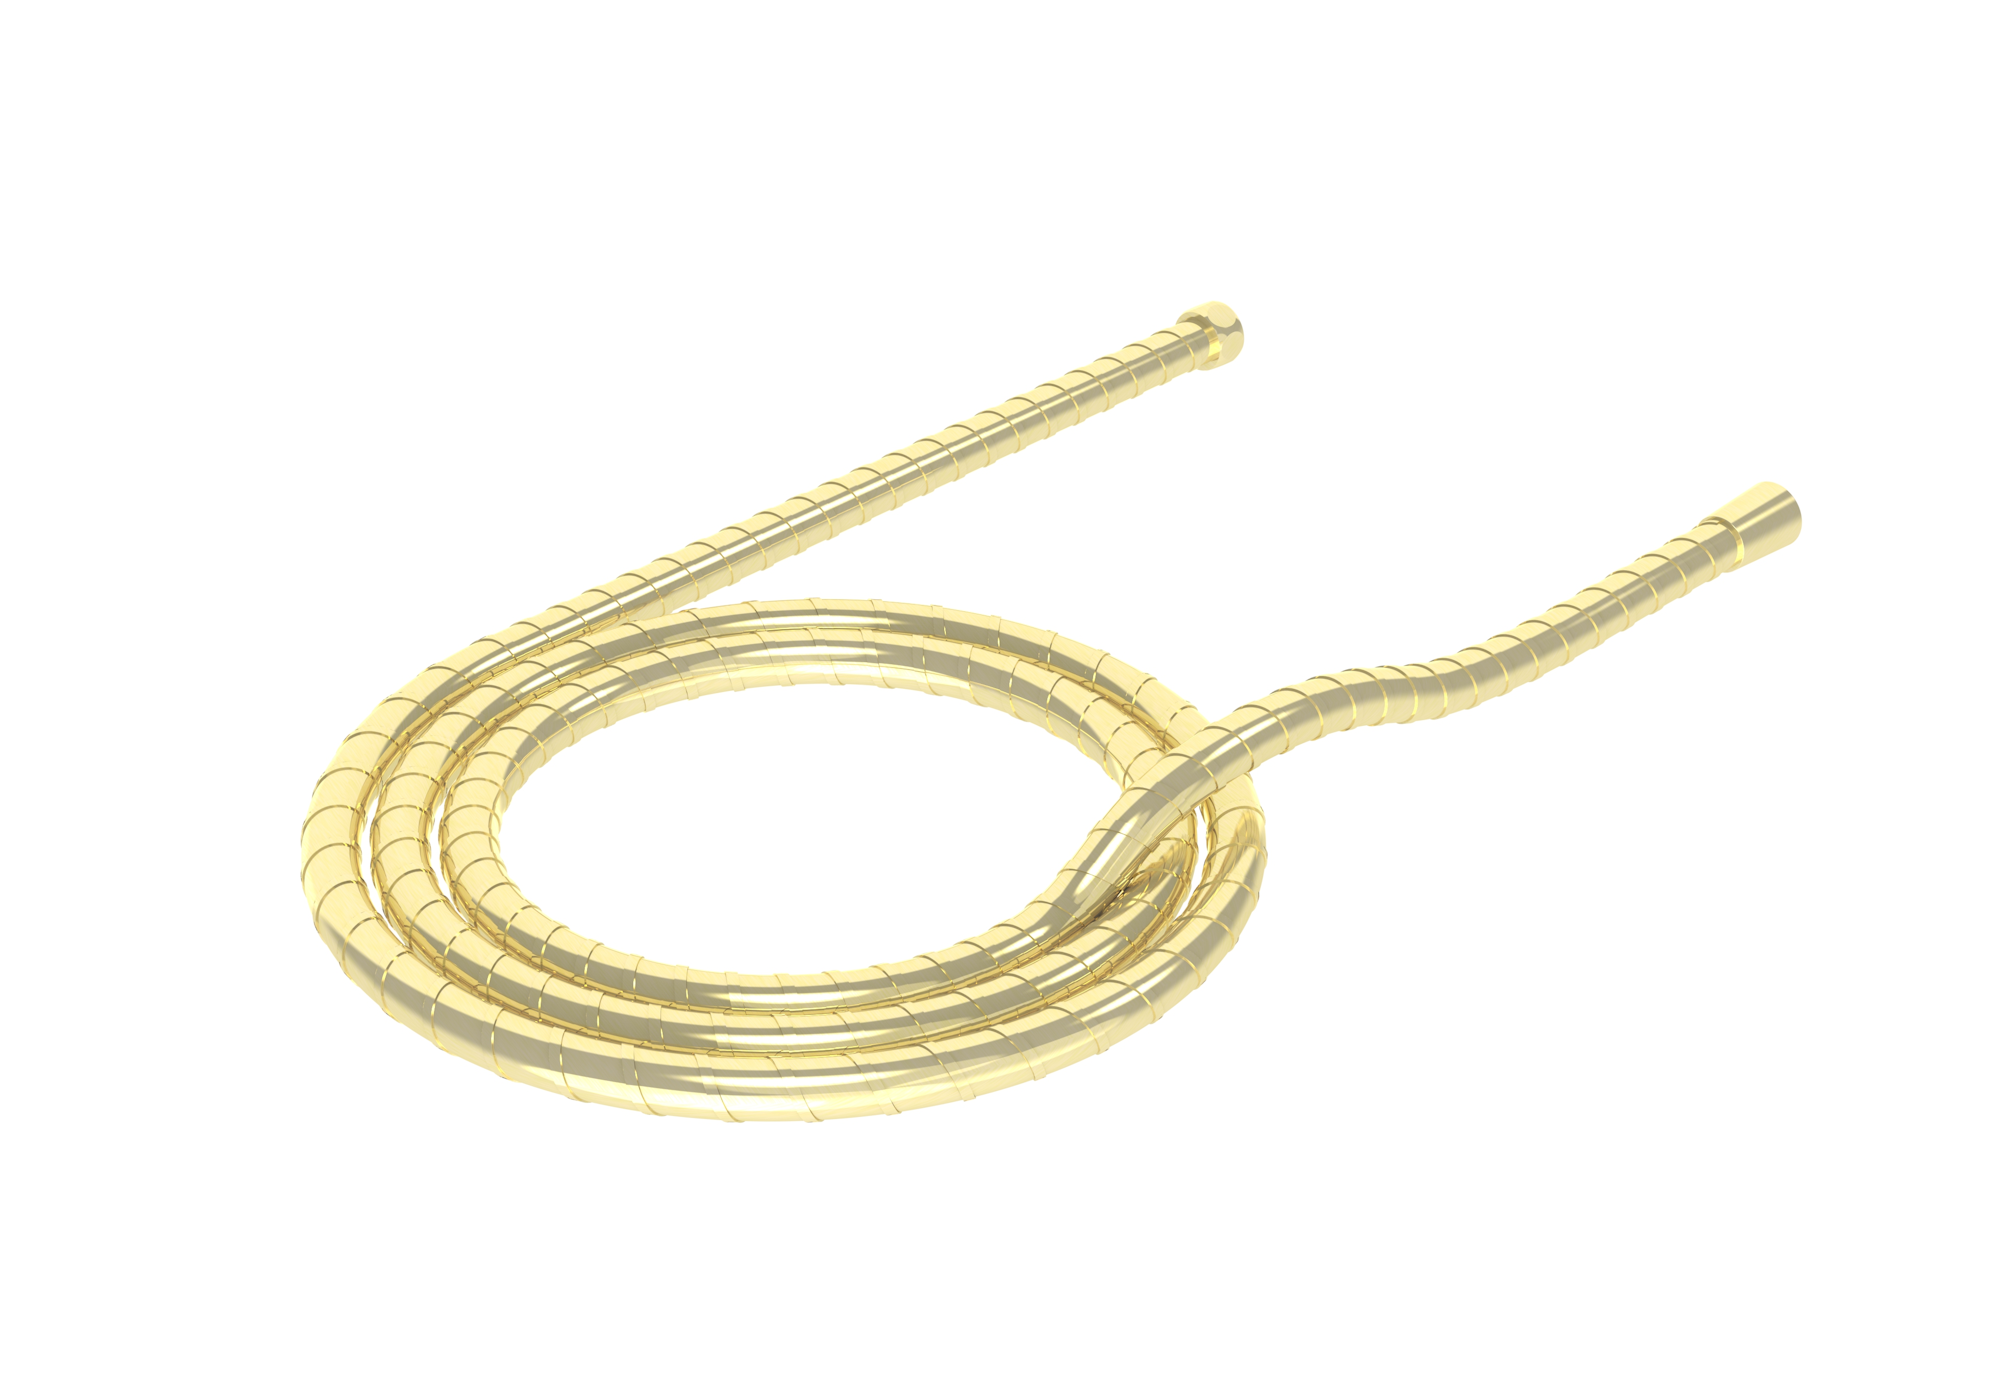 1.8m stainless steel shower hose - Brushed Brass (PVD)